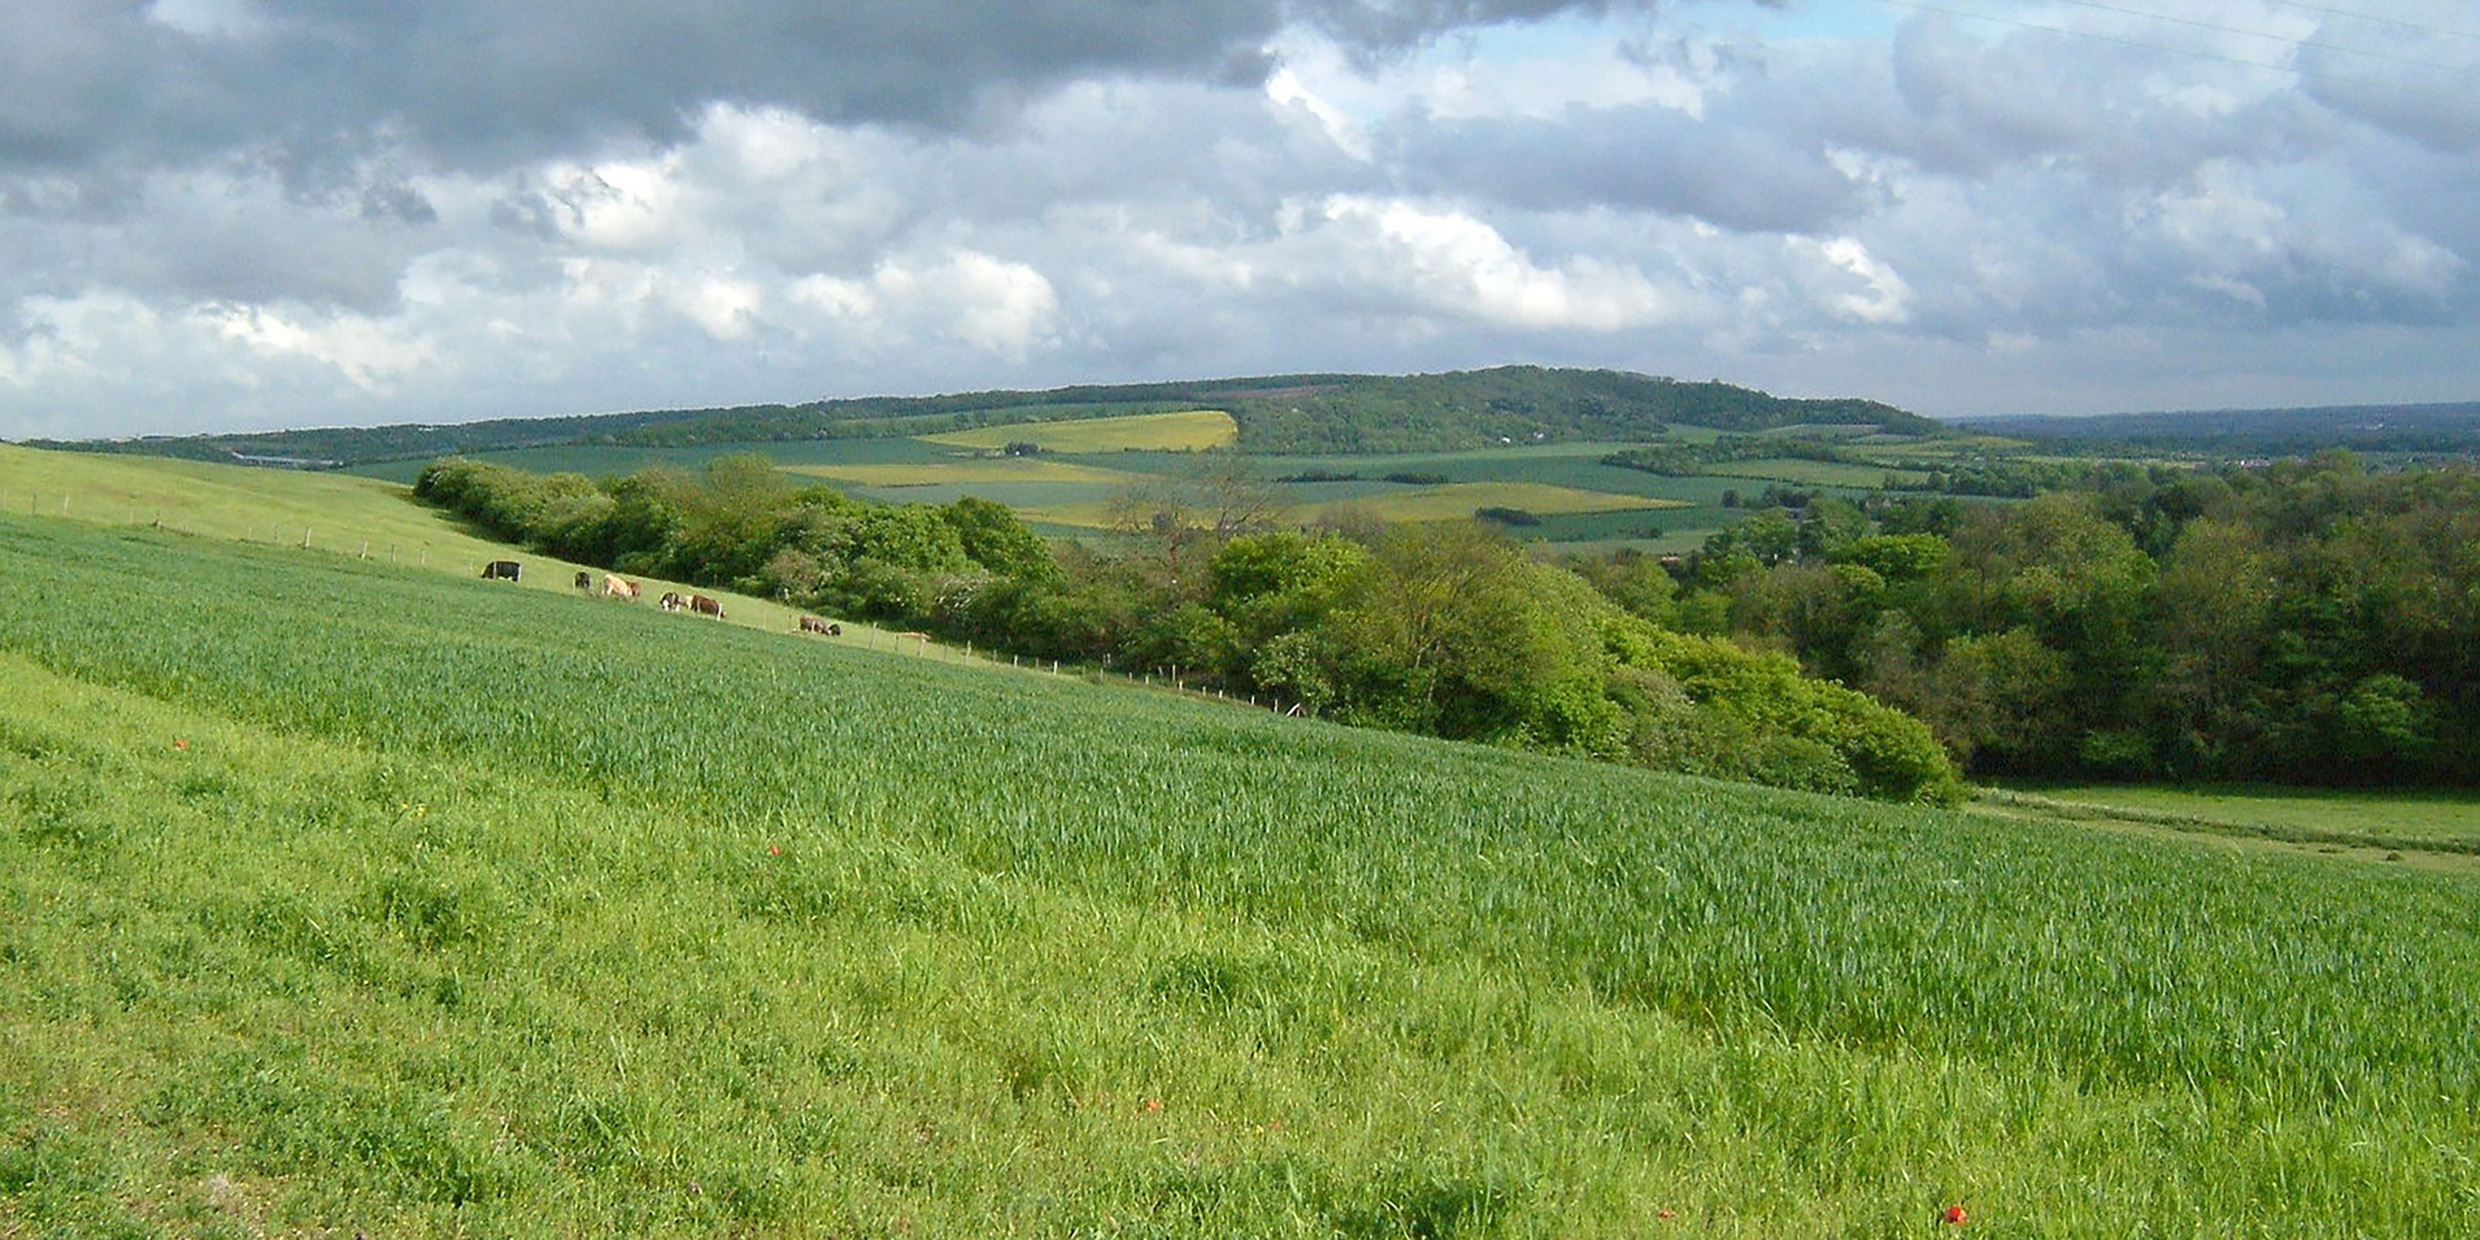 Image of an open grassy valley in southern England